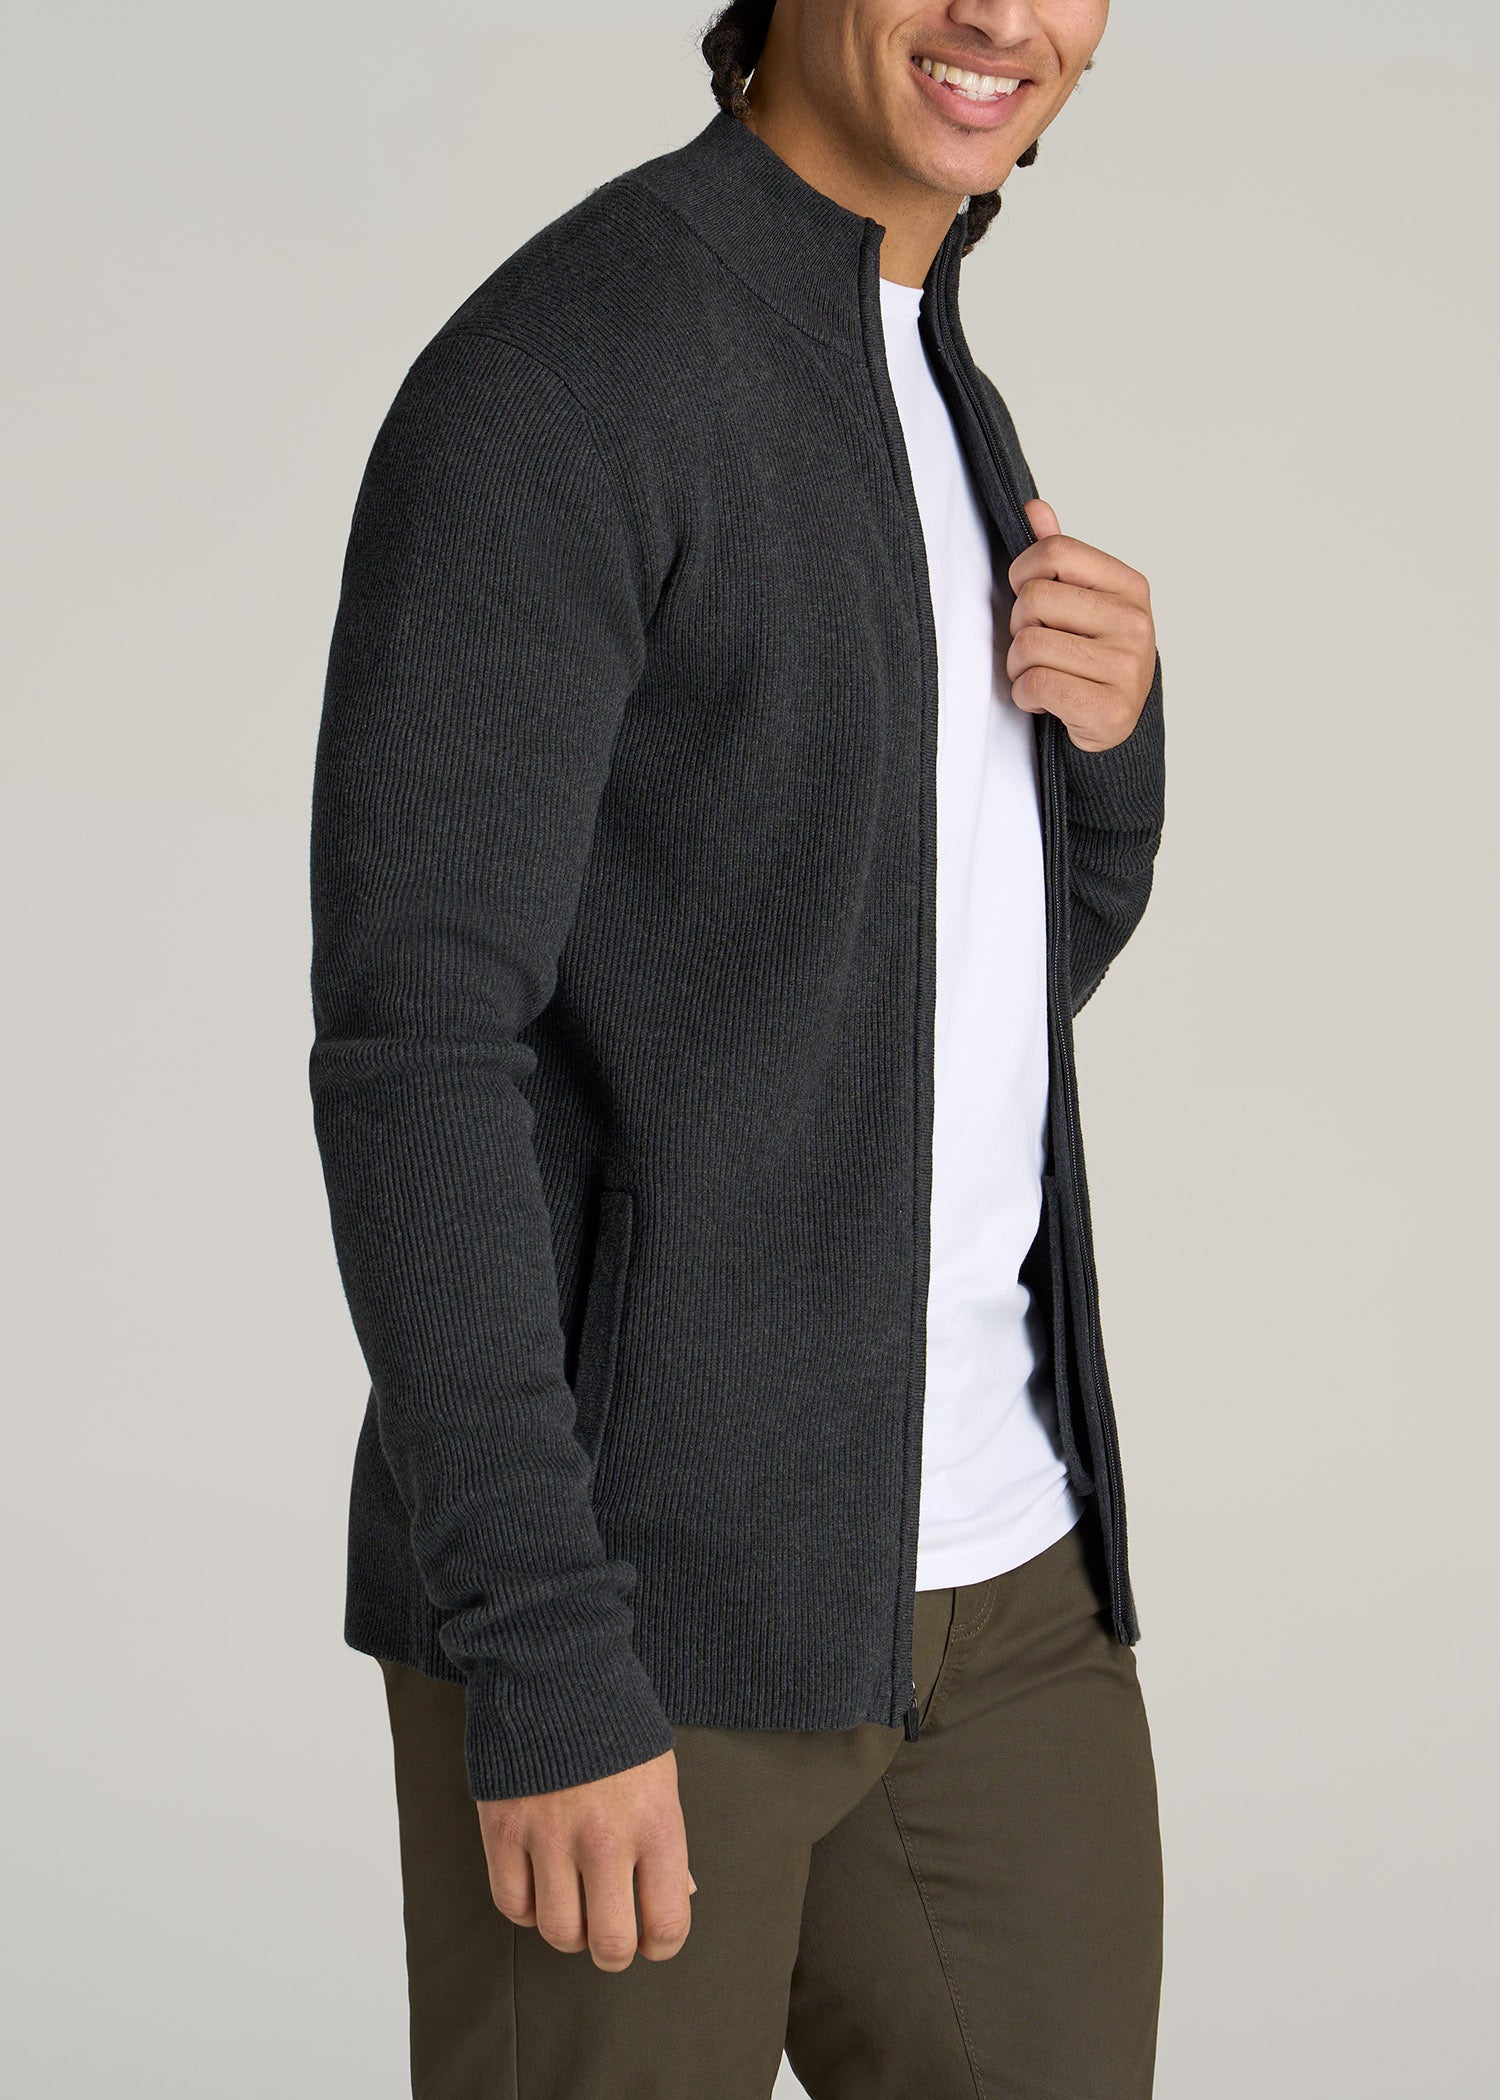 Everyday Quarter-Zip Tall Men's Sweater in Charcoal Mix